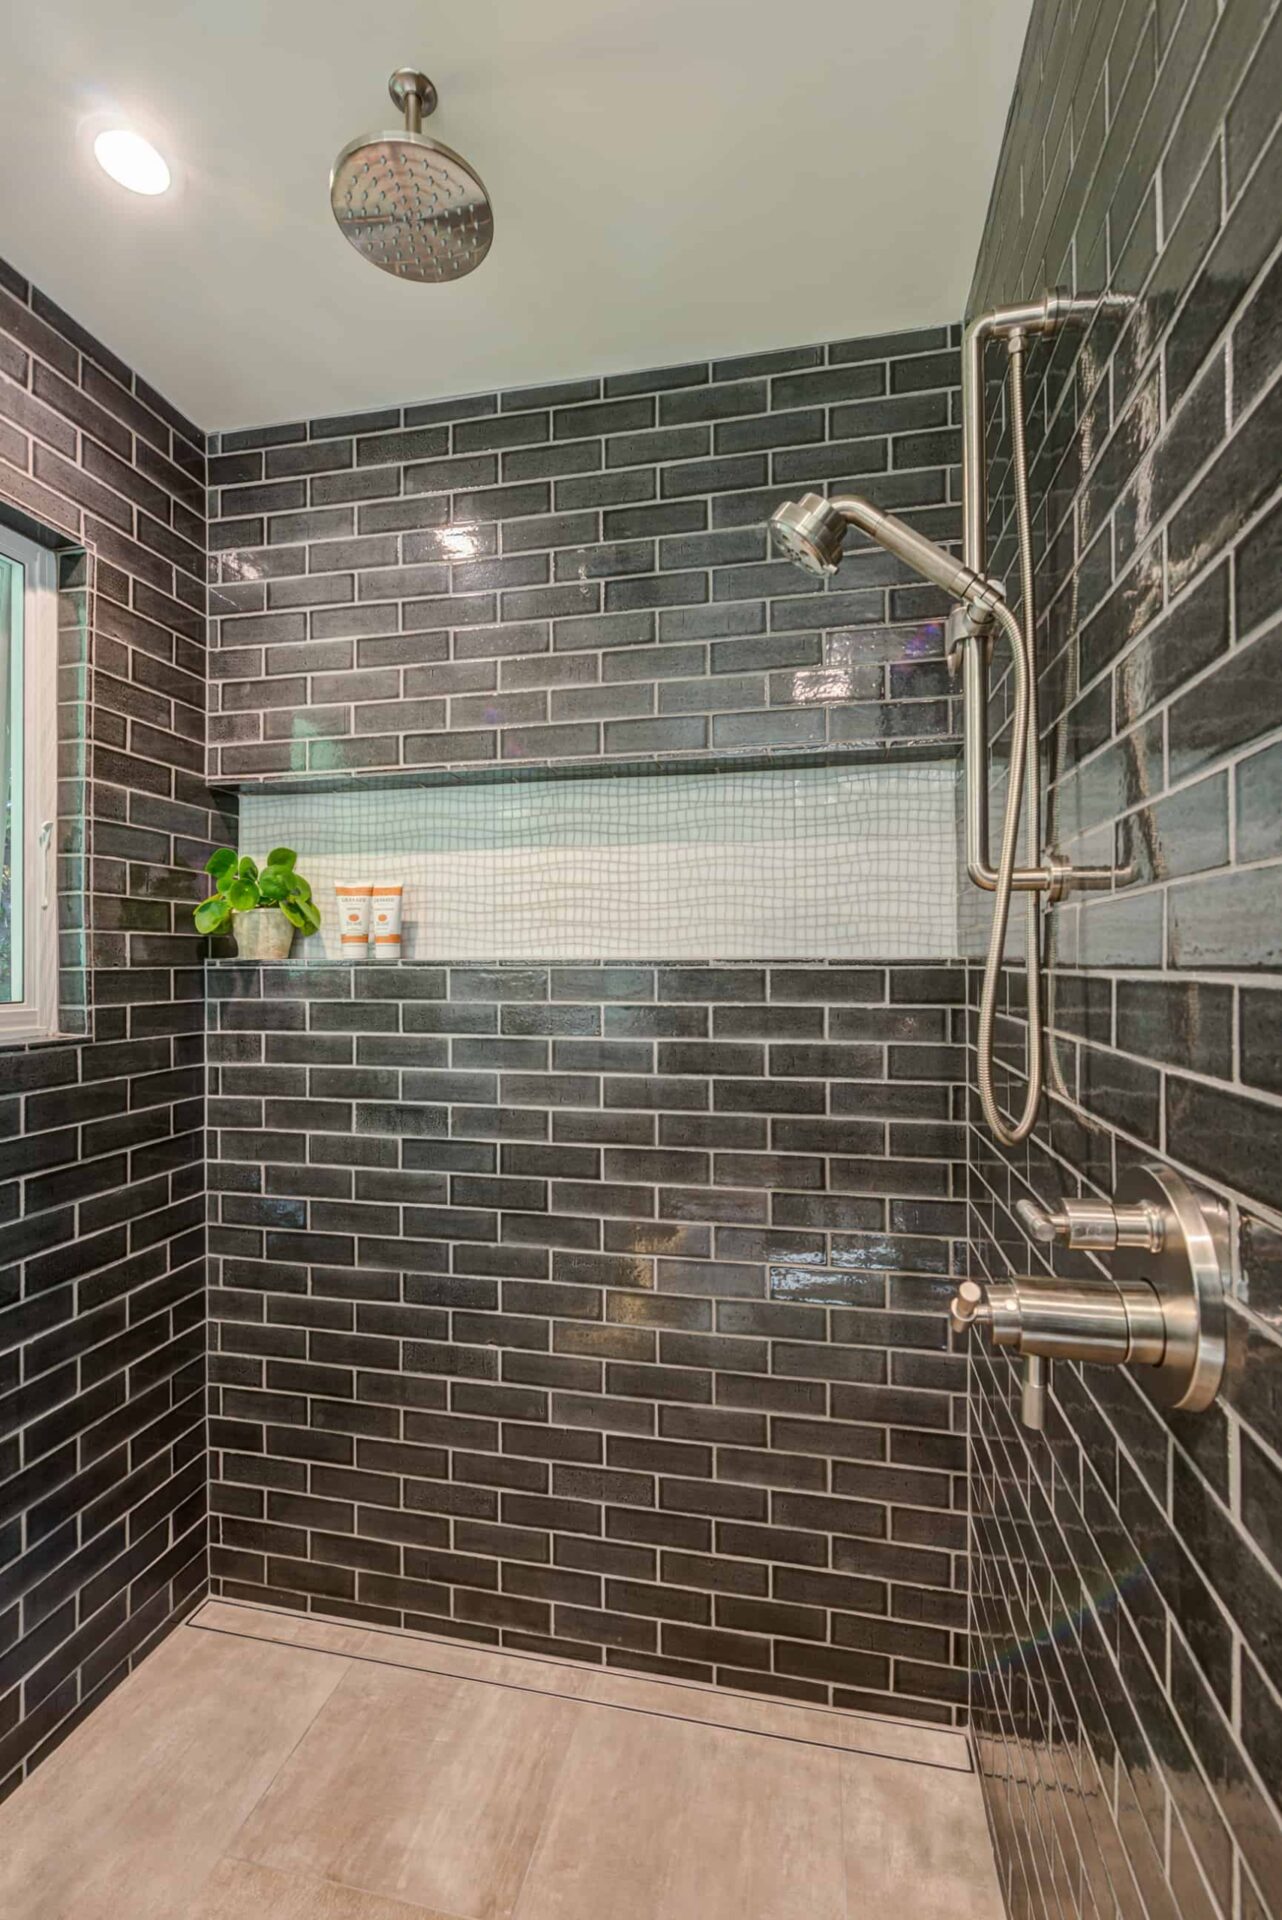 Recent shower renovation with modern subway tiles.